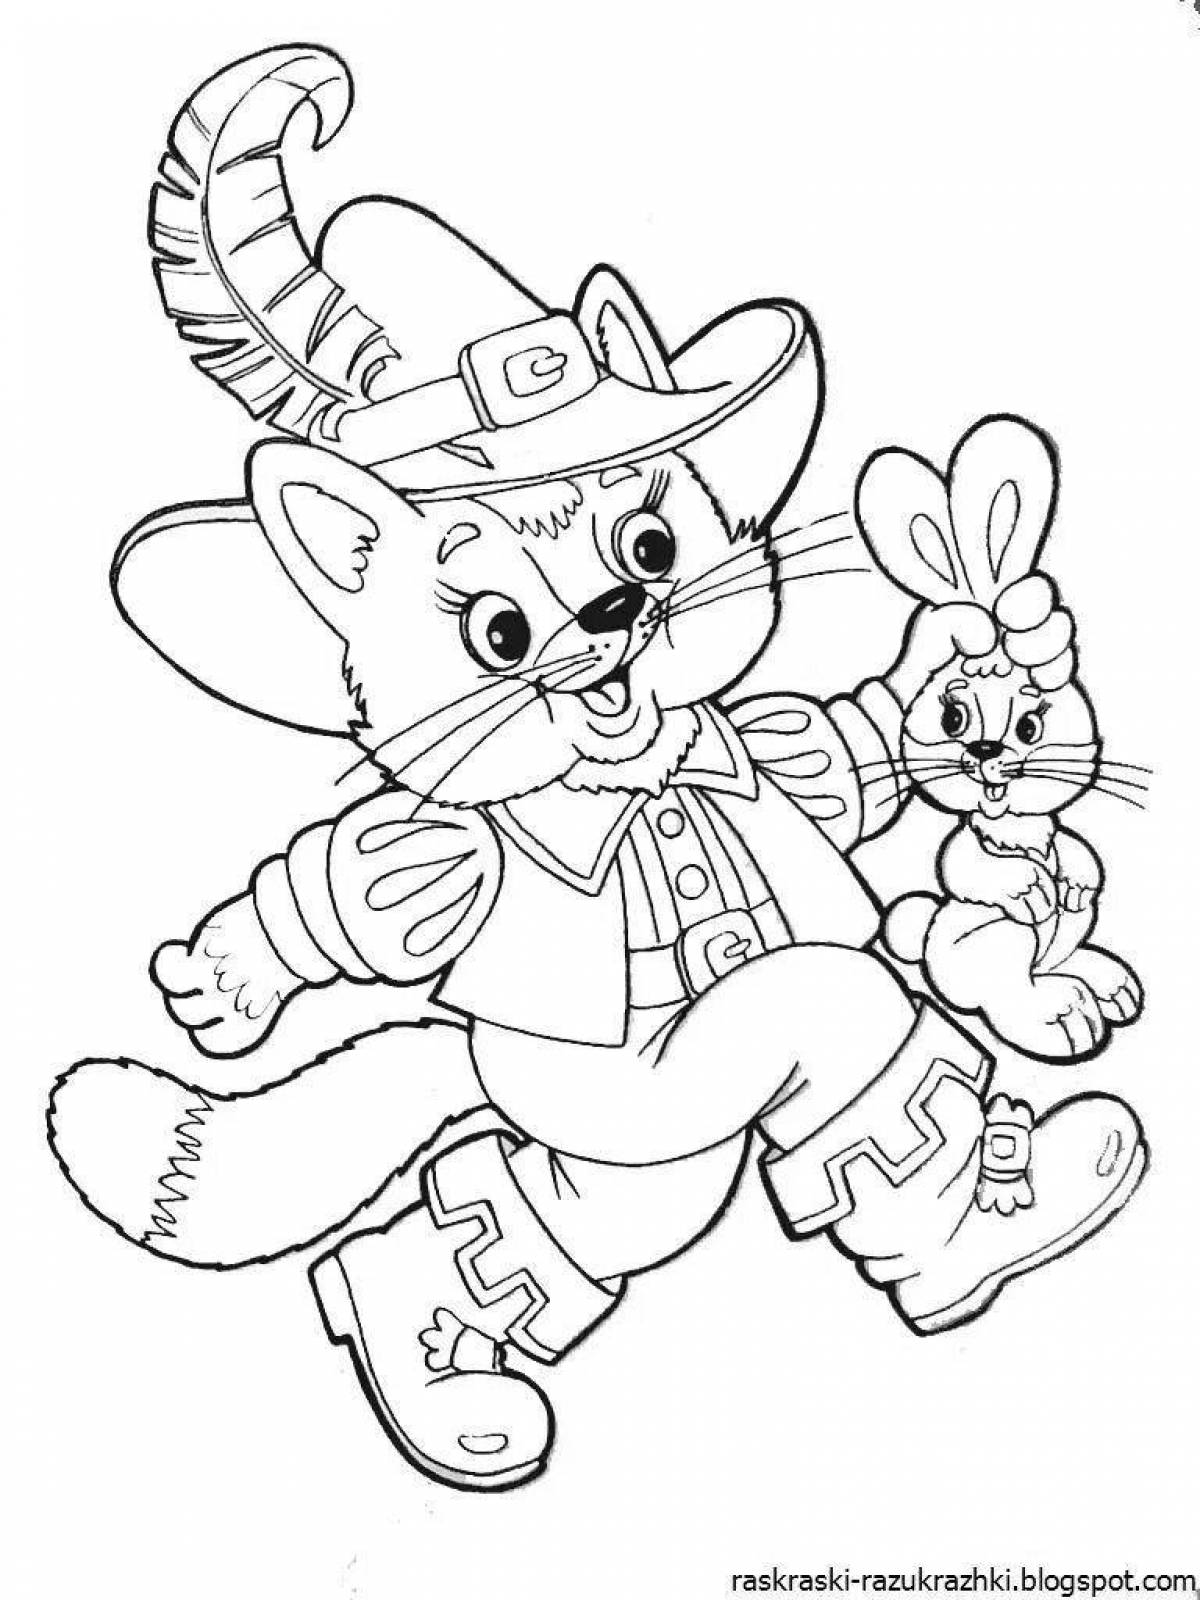 Amazing coloring pages for children's stories